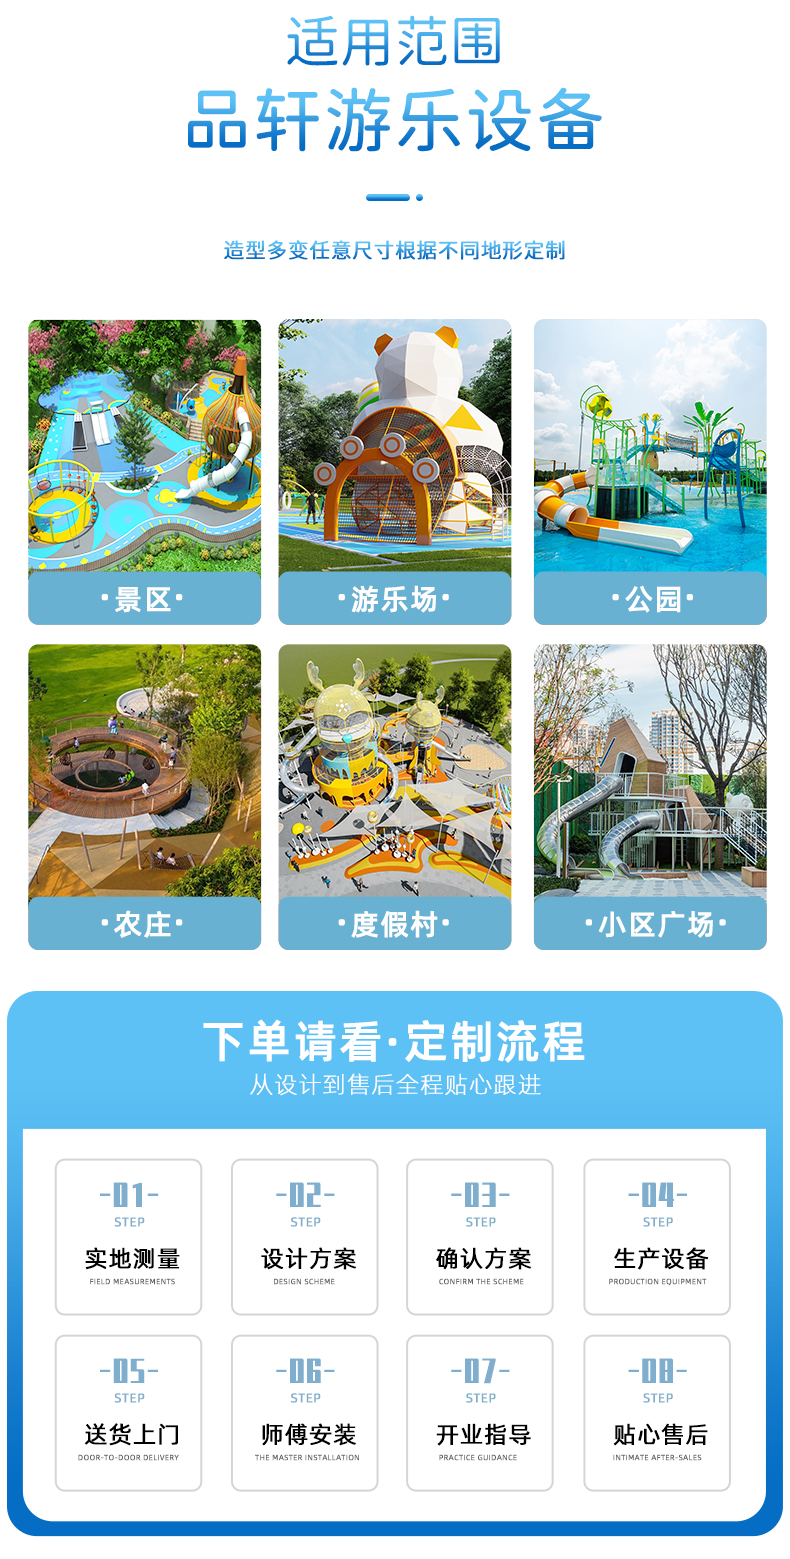 Large outdoor children's playground equipment, shopping mall, outdoor slide scenic area, outdoor playground expansion facilities